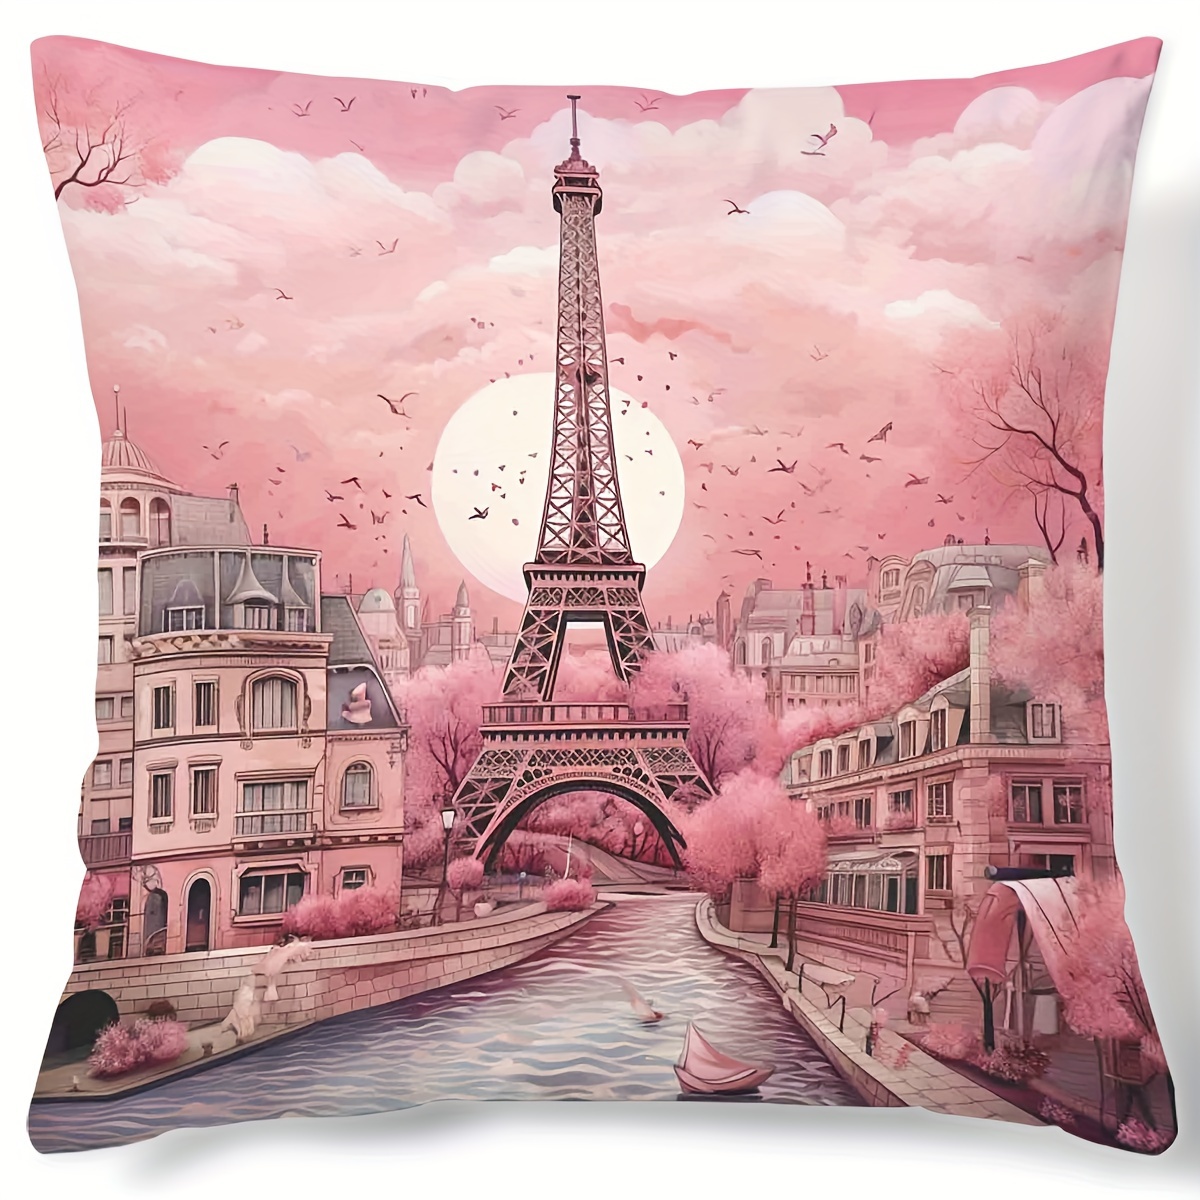 

1pc Contemporary Style Floral Eiffel Tower Digital Print Throw Pillow Cover, Paris Themed Home Decor Cushion Case, Pink Sunset Romantic Scene, For Sofa Living Room Bedroom (18x18 Inches)